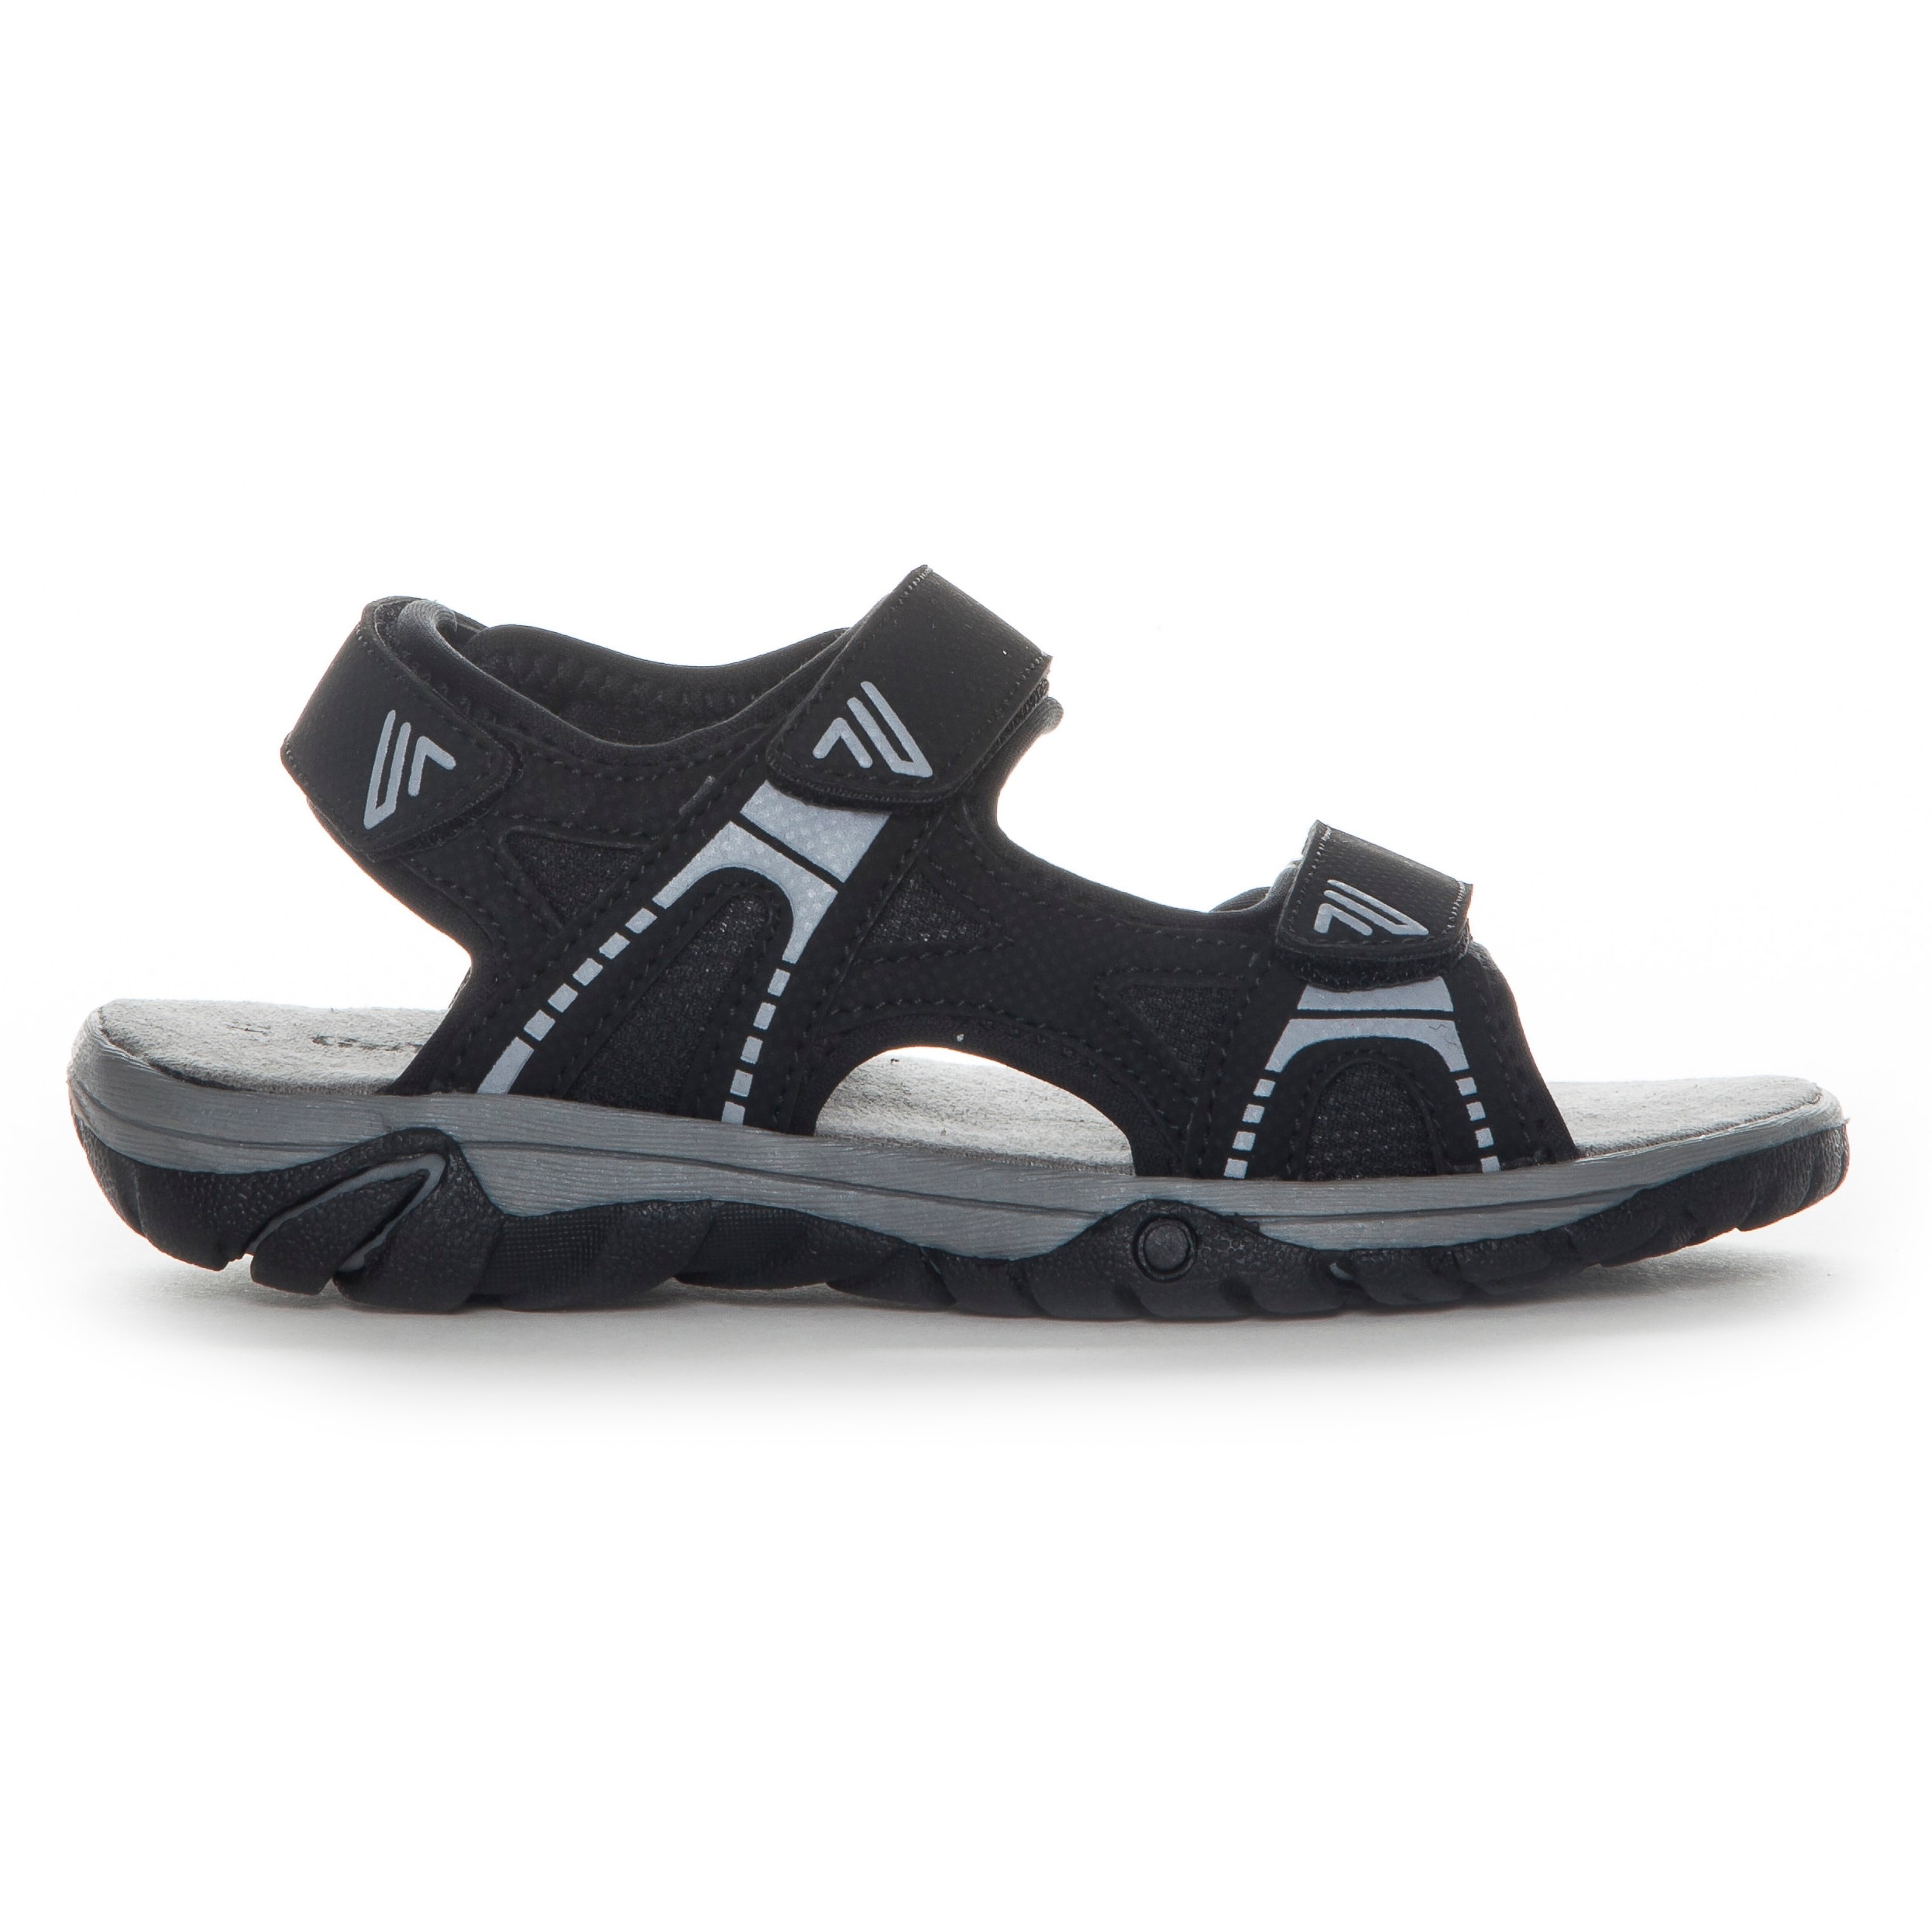 Buy Kids' Sandal from Outnorth